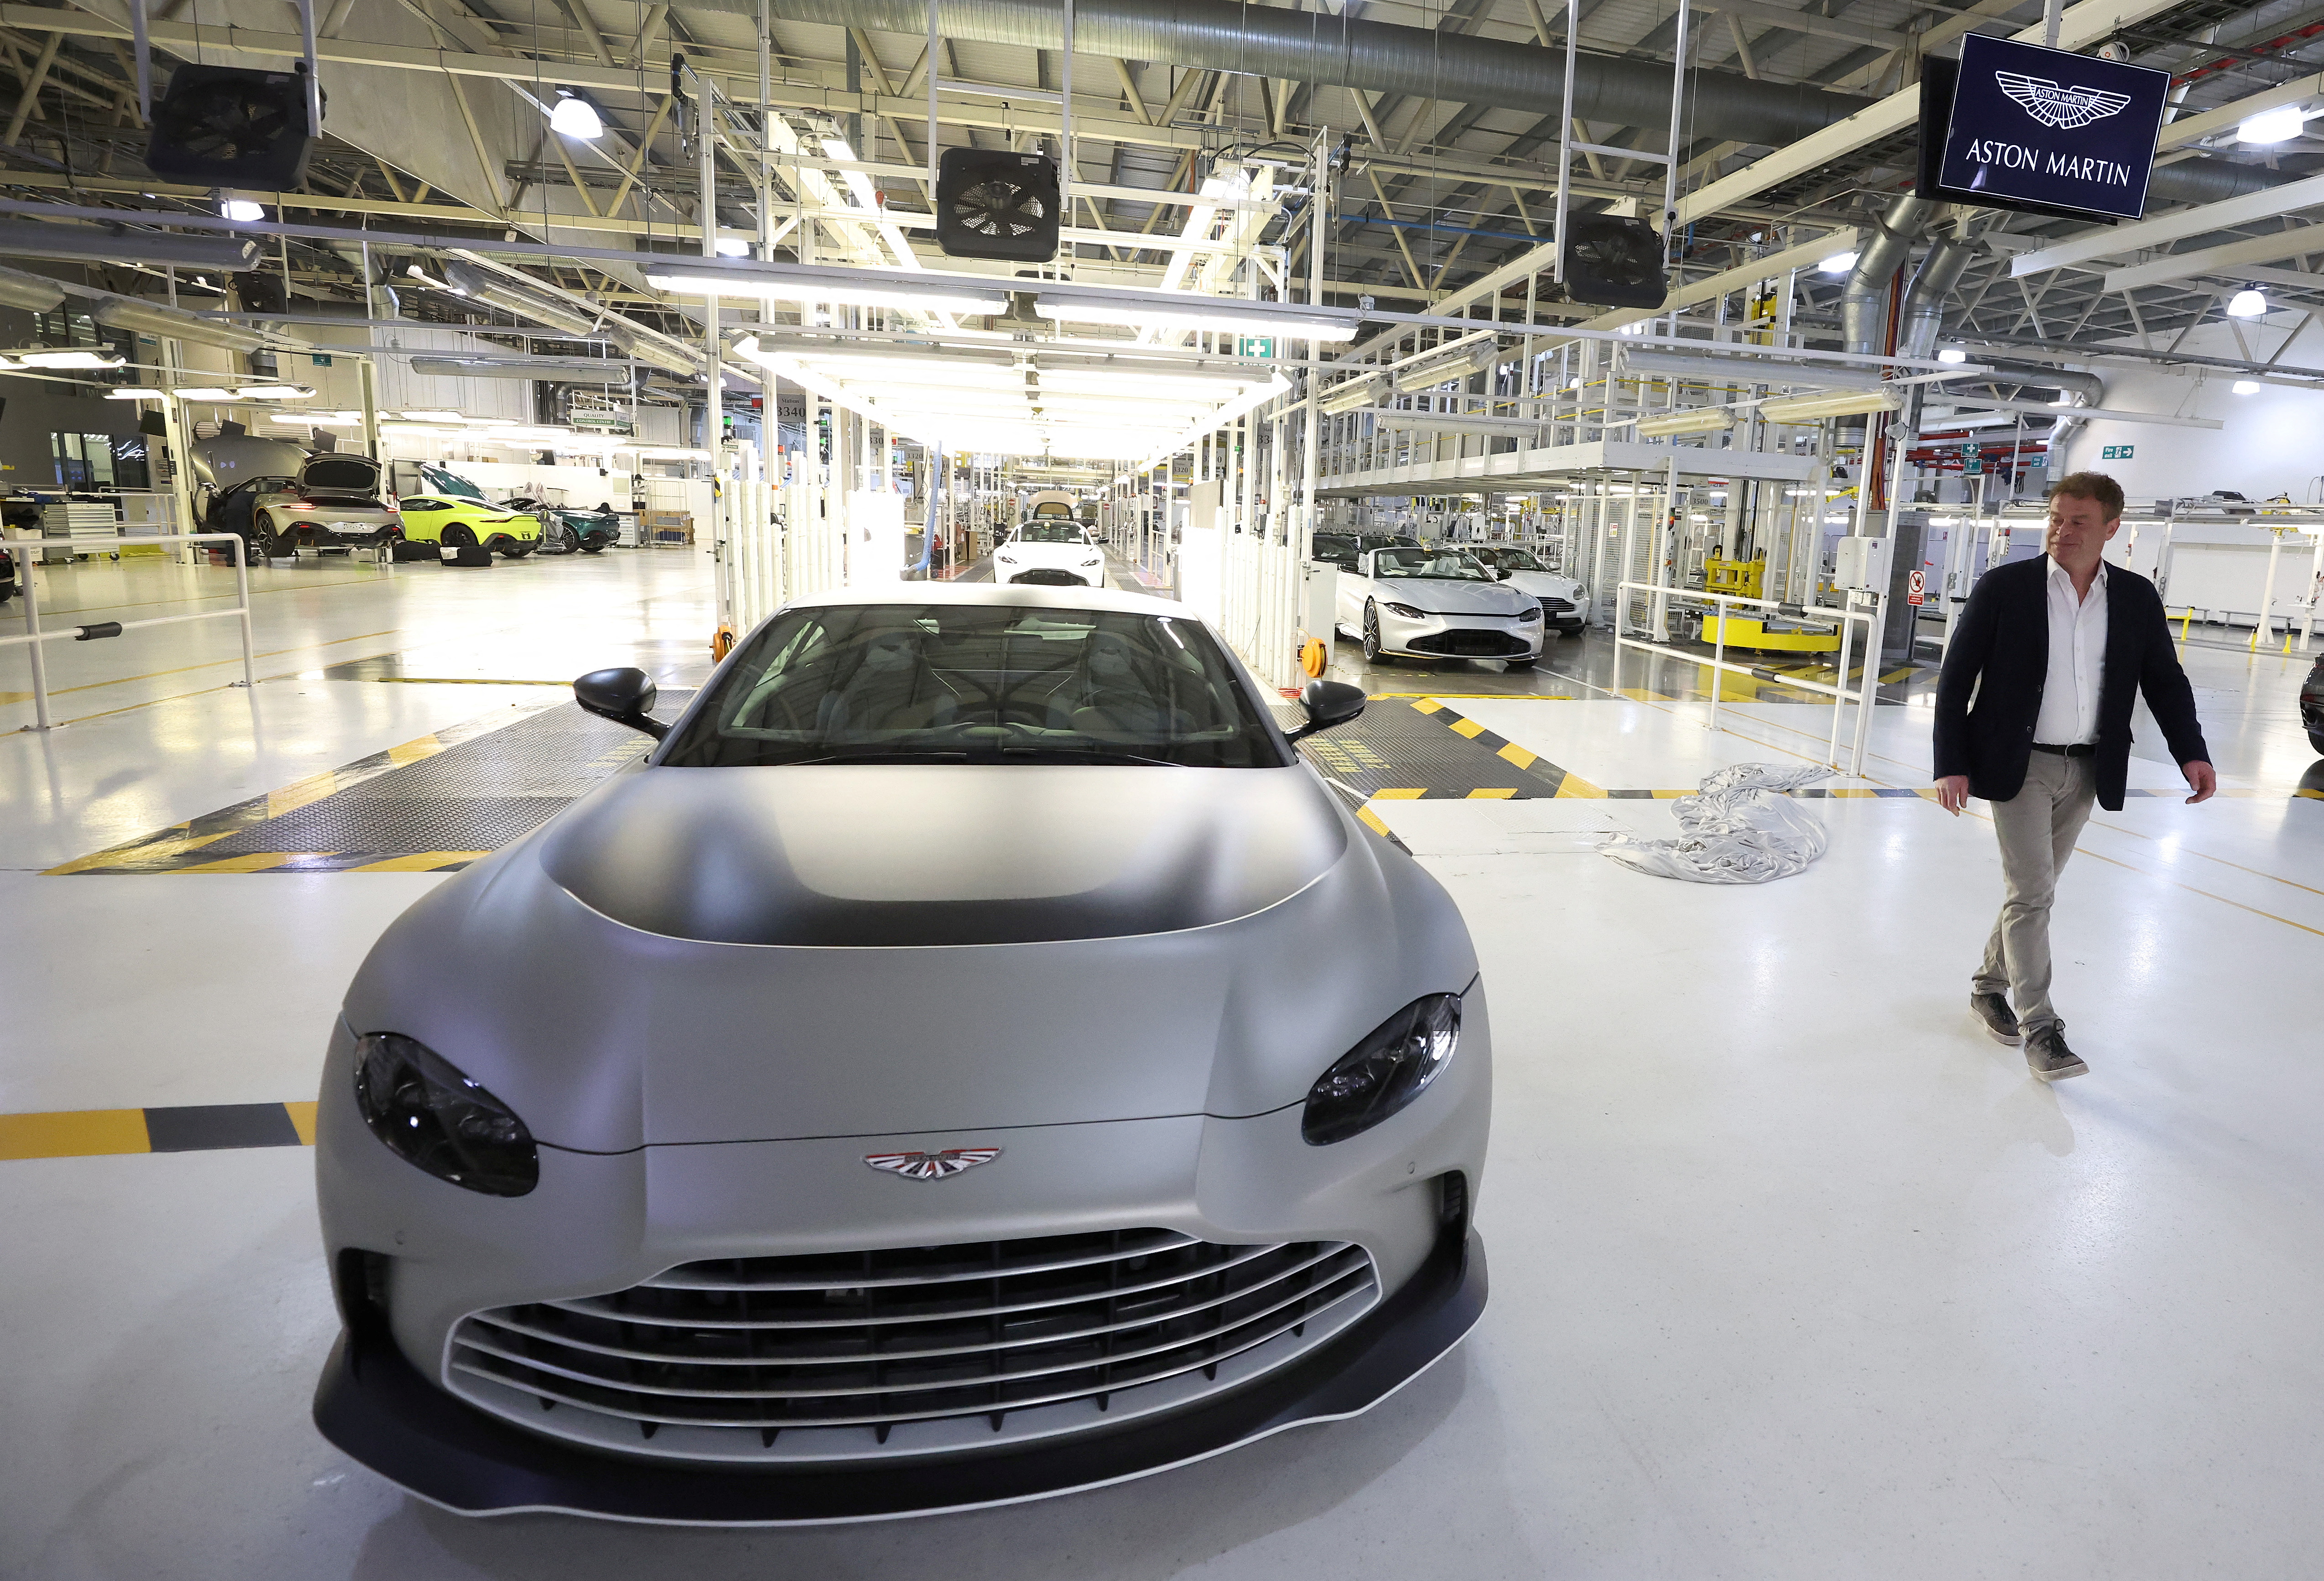 Aston Martin CEO Tobias Moers walks past the newly unveiled V12 Vantage car at the company’s factory in Gaydon